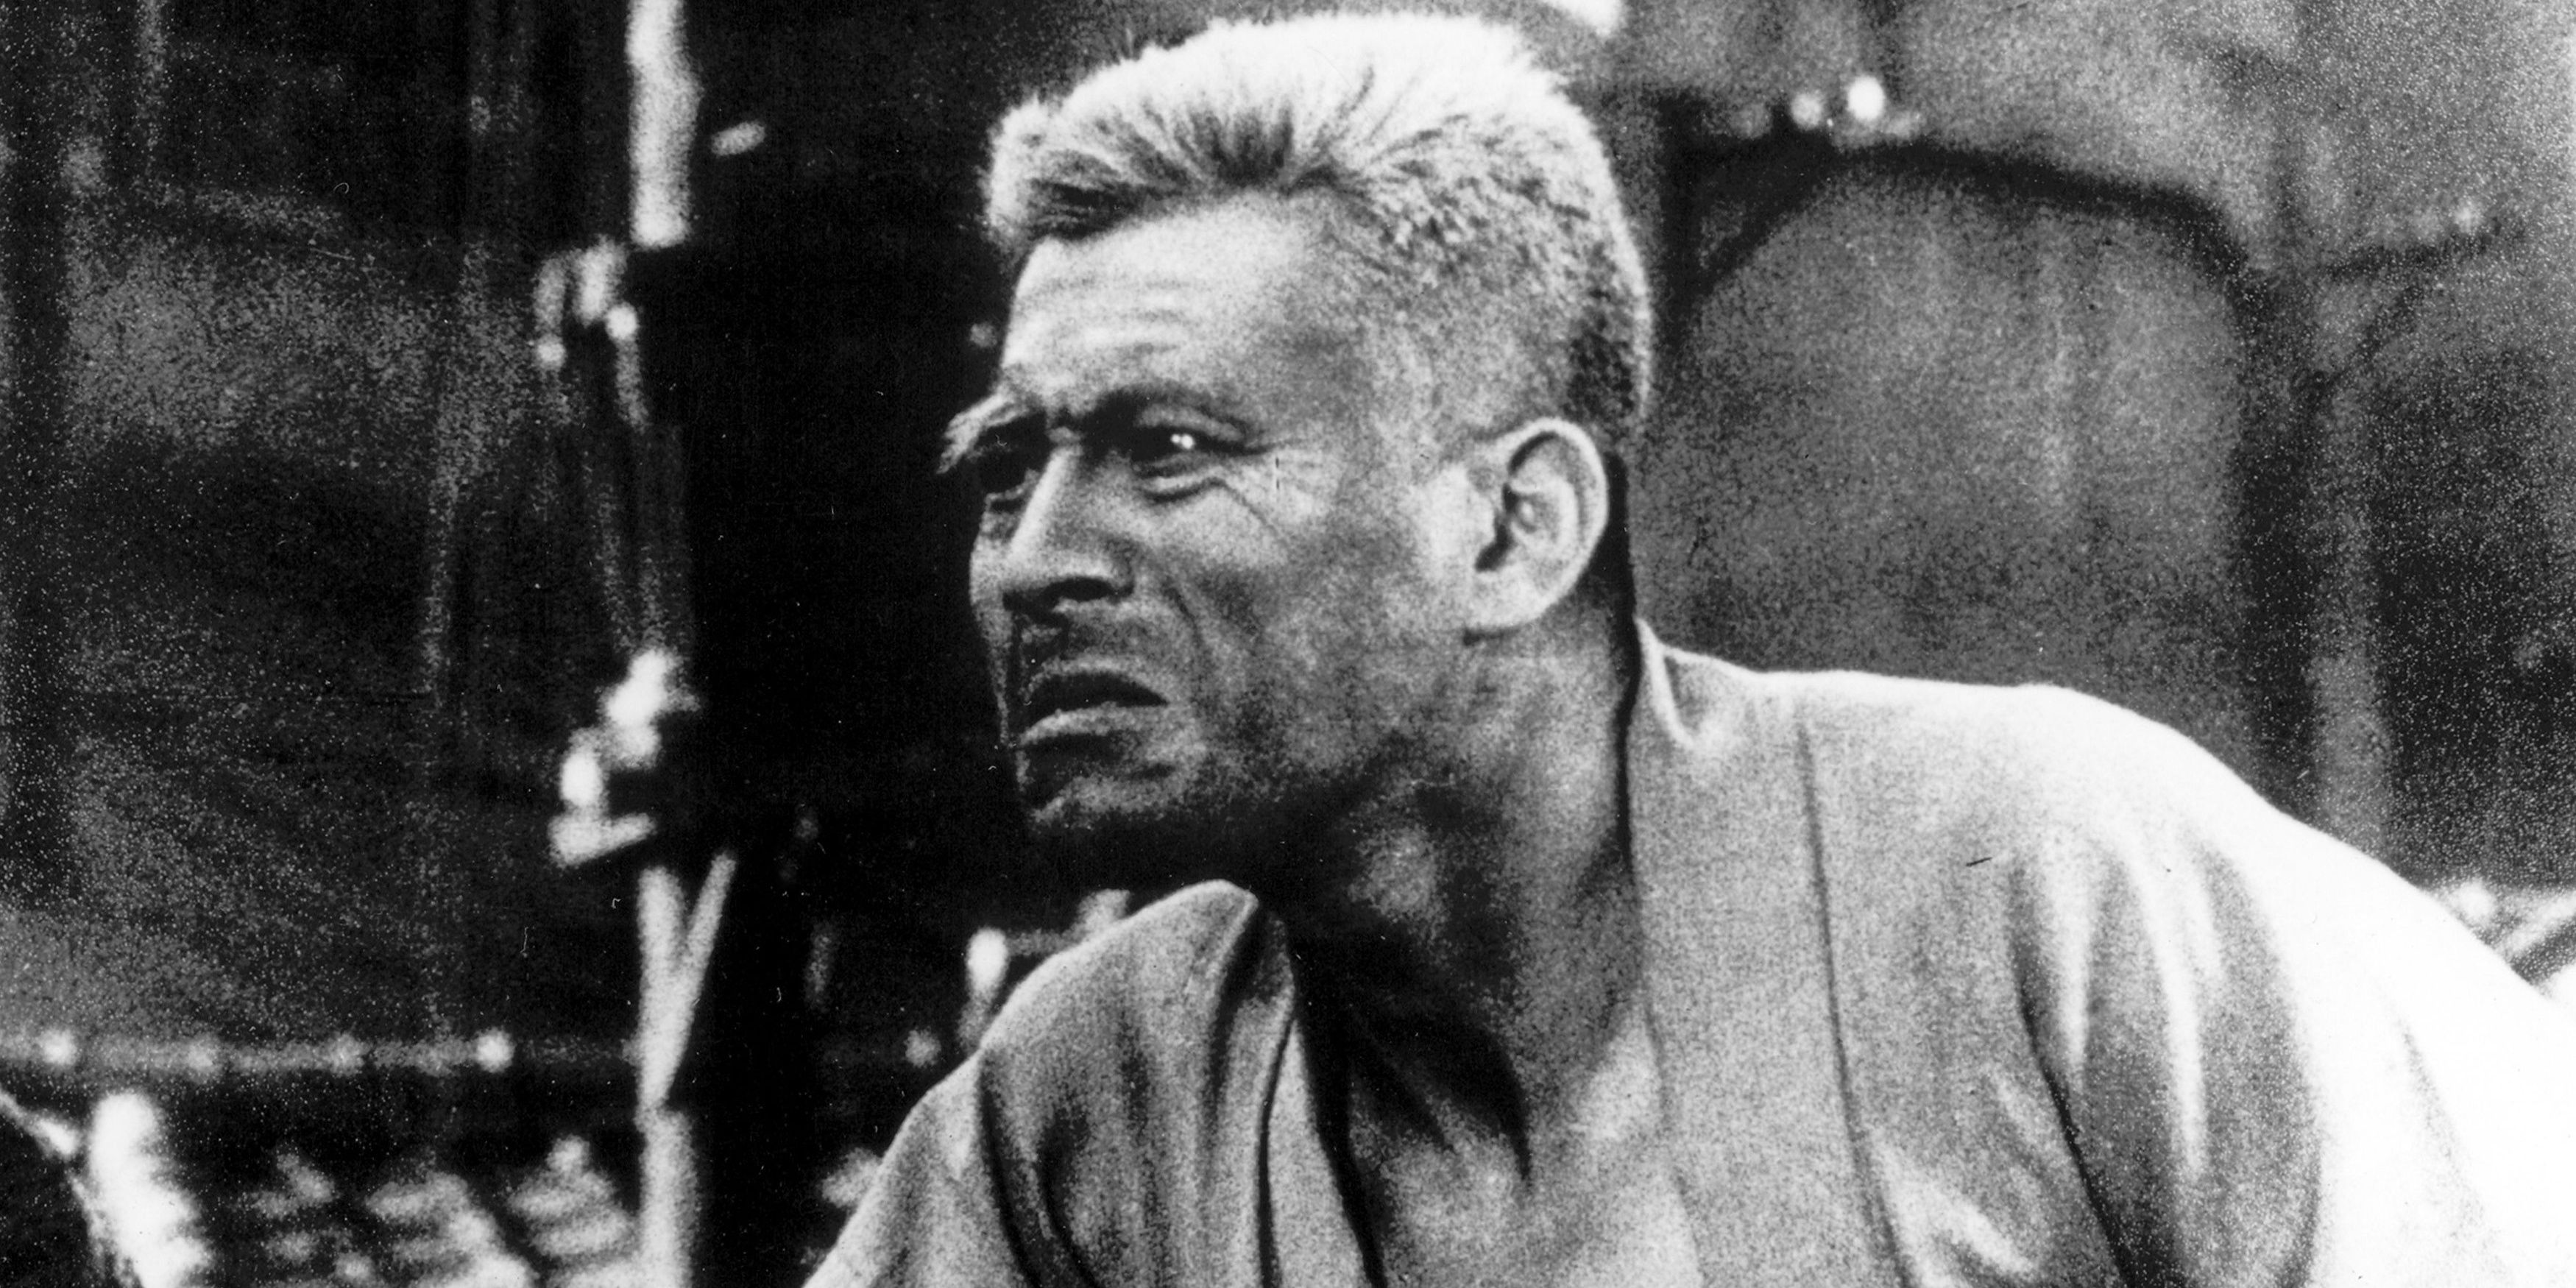 Toshiro Mifune in a state of despair